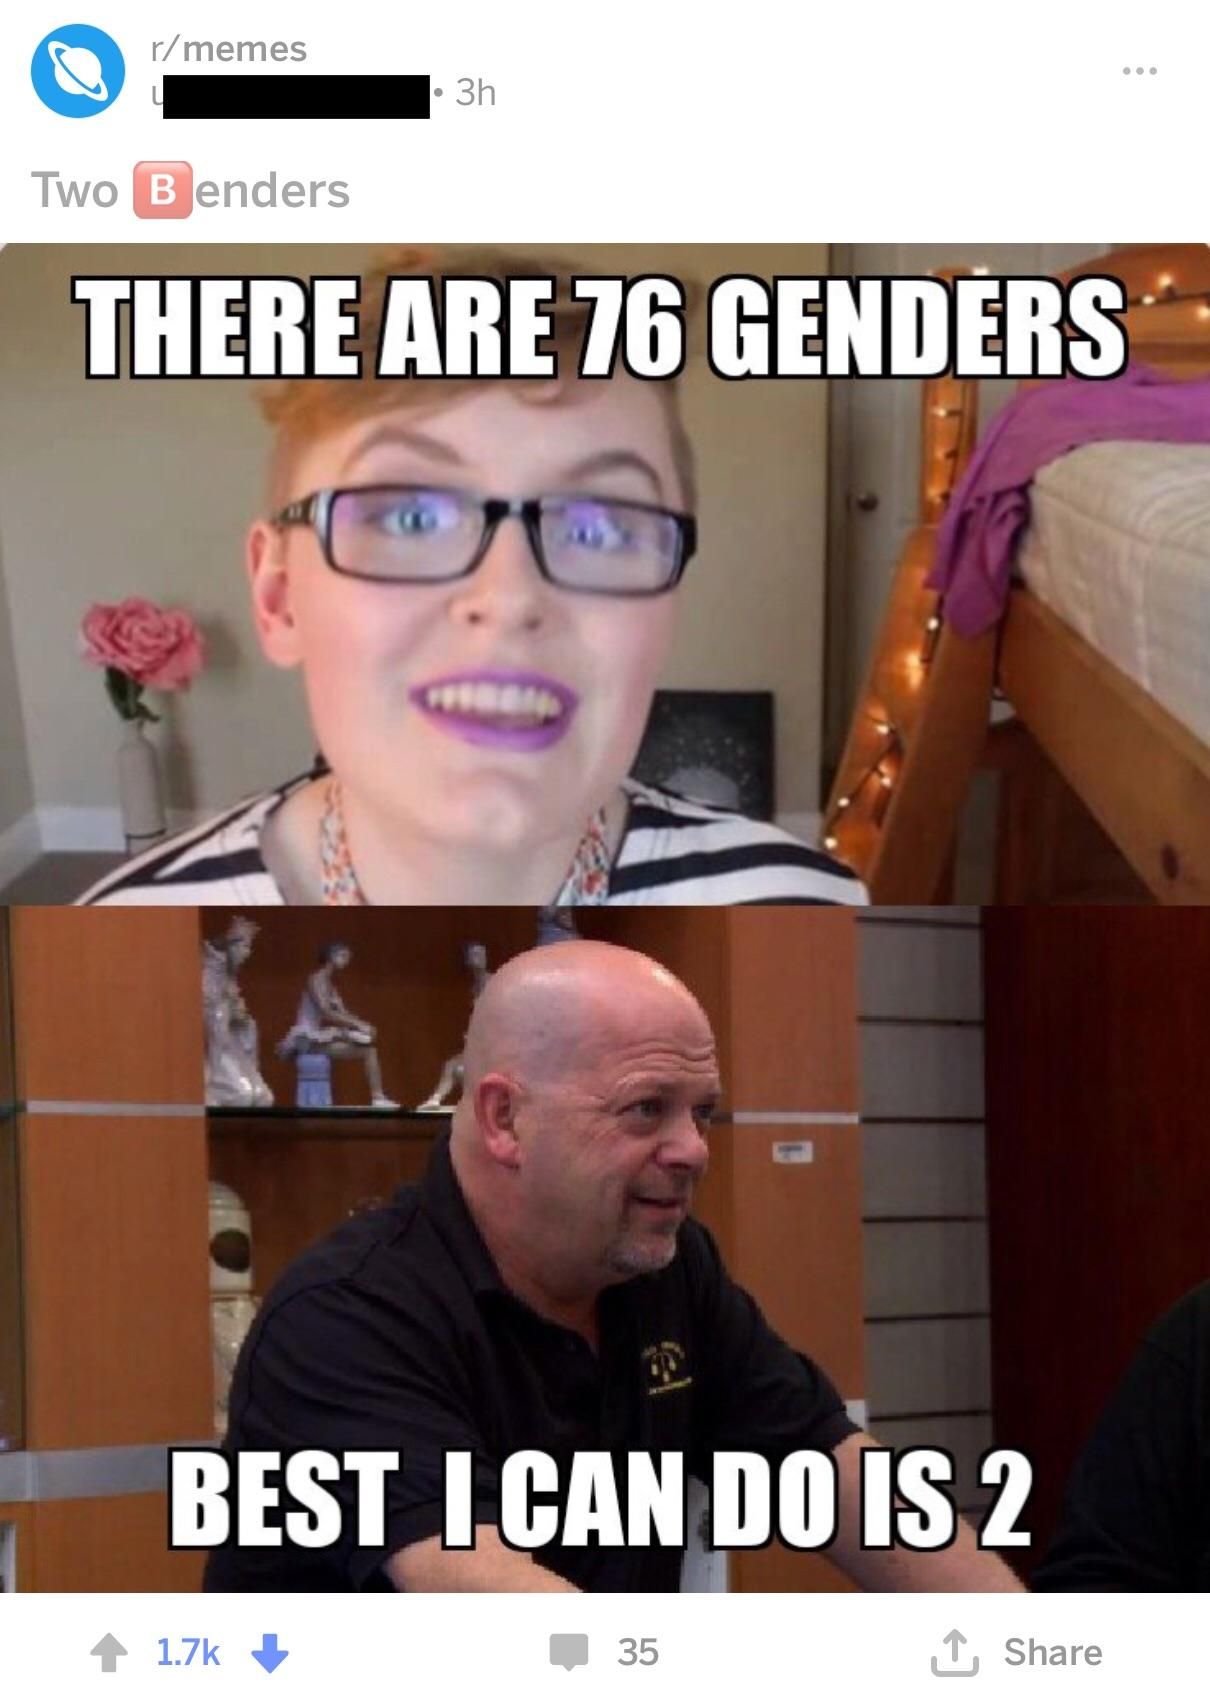 r/memes
• 3h
Two Benders
THERE ARE 76 GENDERS
el
1
BEST I CAN DO IS 2
1.7k
35
↑ Share